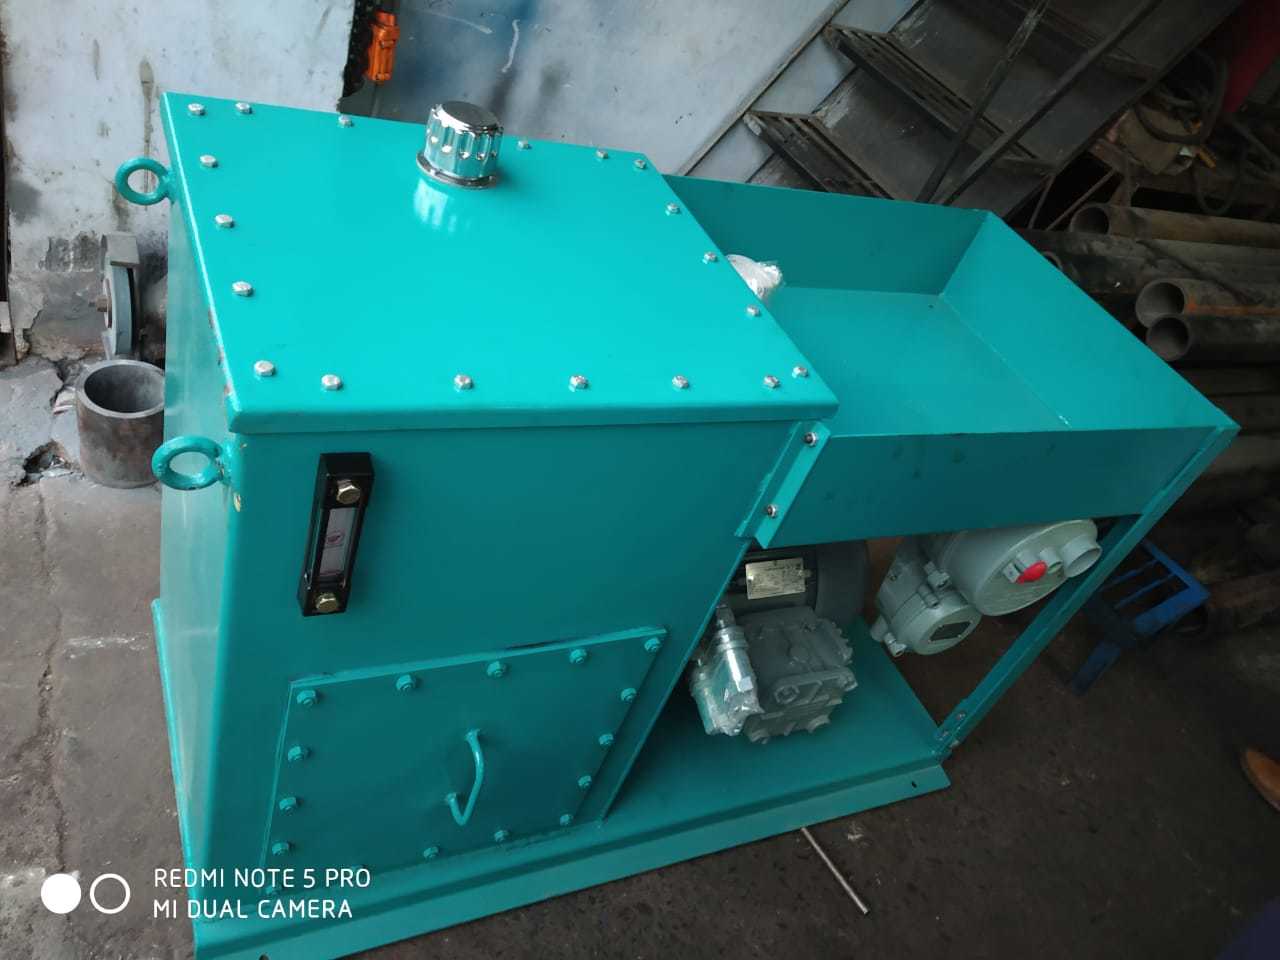 Oil Mill Hydraulic Power Pack